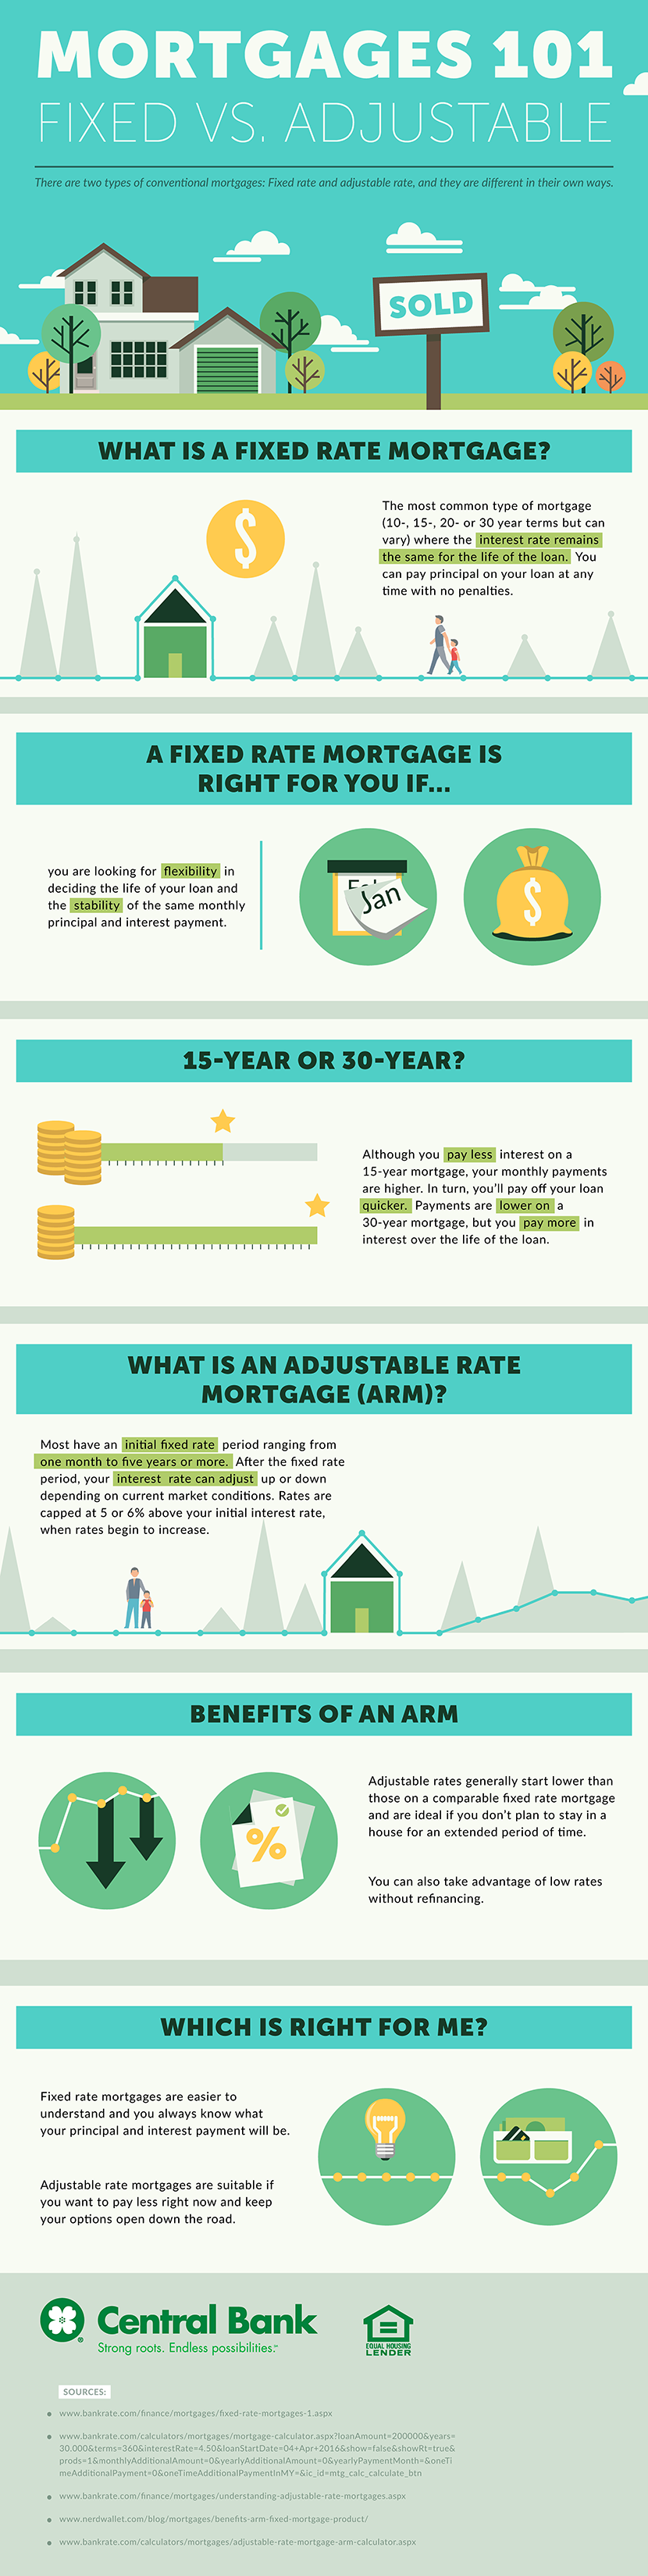 Infographic explaining fixed versus adjustable rates for home loans